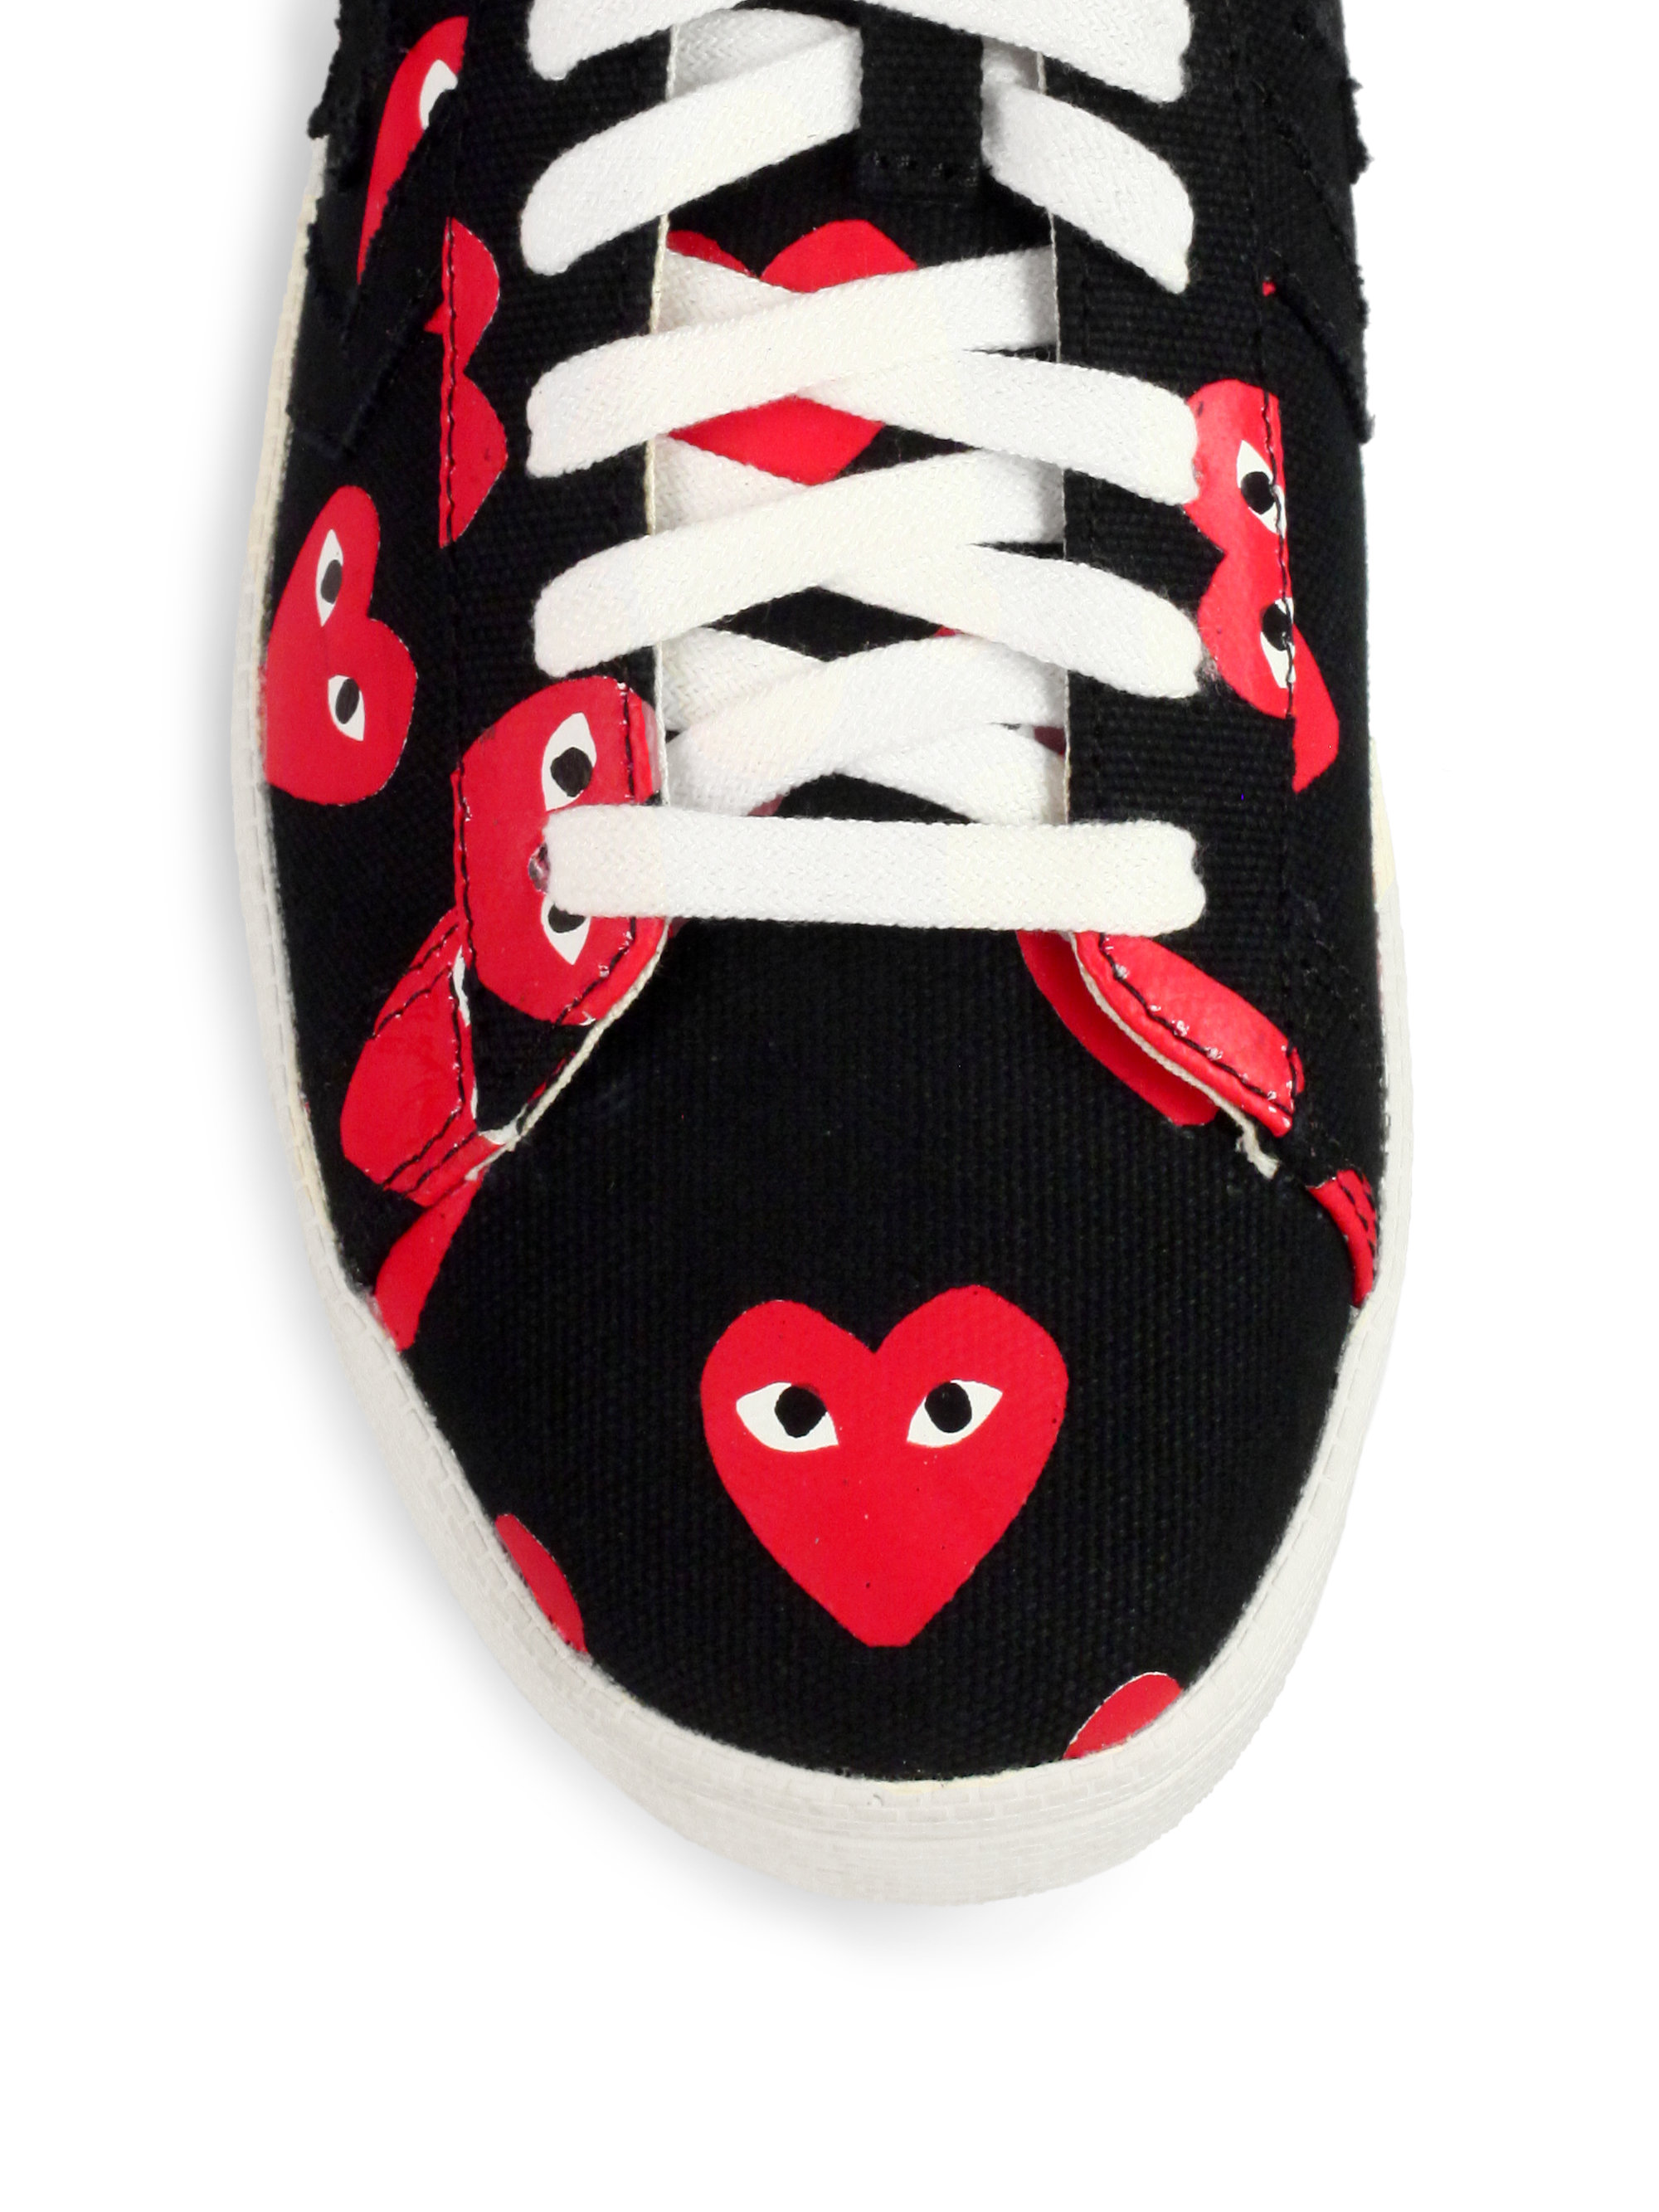 Play comme des garçons Canvas Lace-up Sneakers in Black (BLACK RED) | Lyst